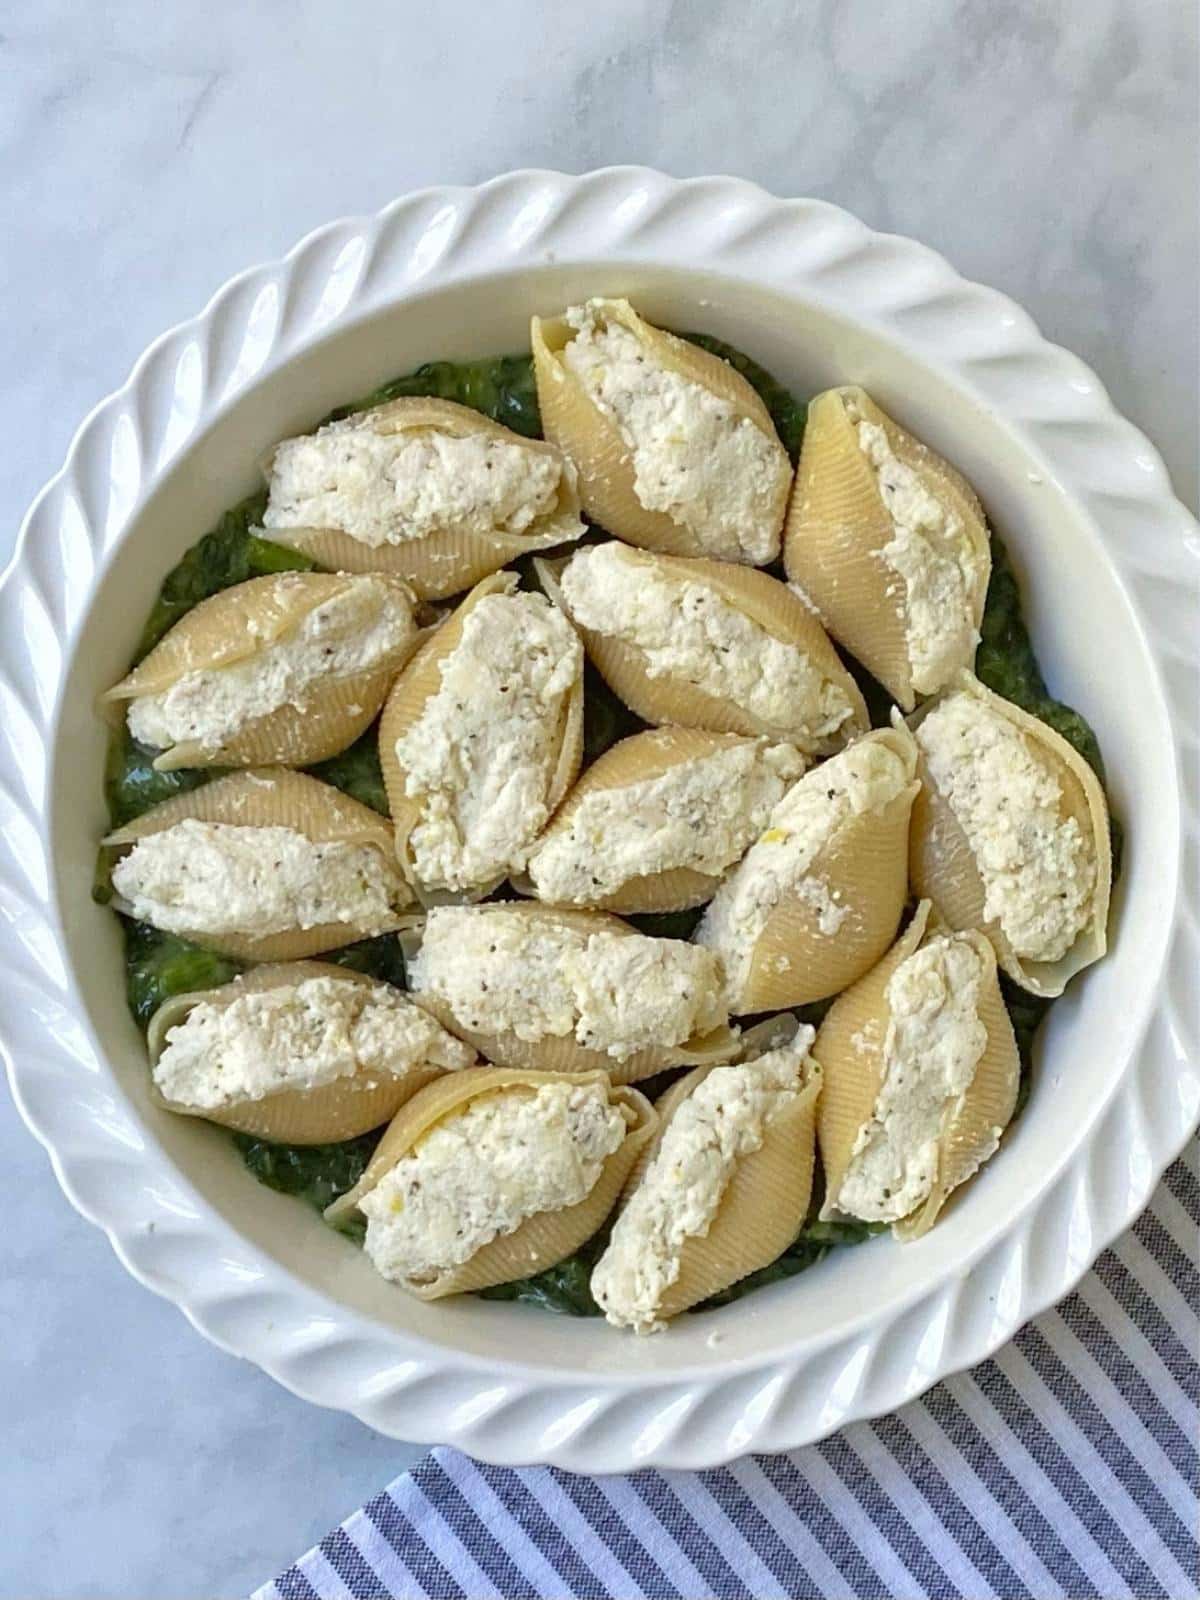 stuffed shells arranged over spinach in baking dish.